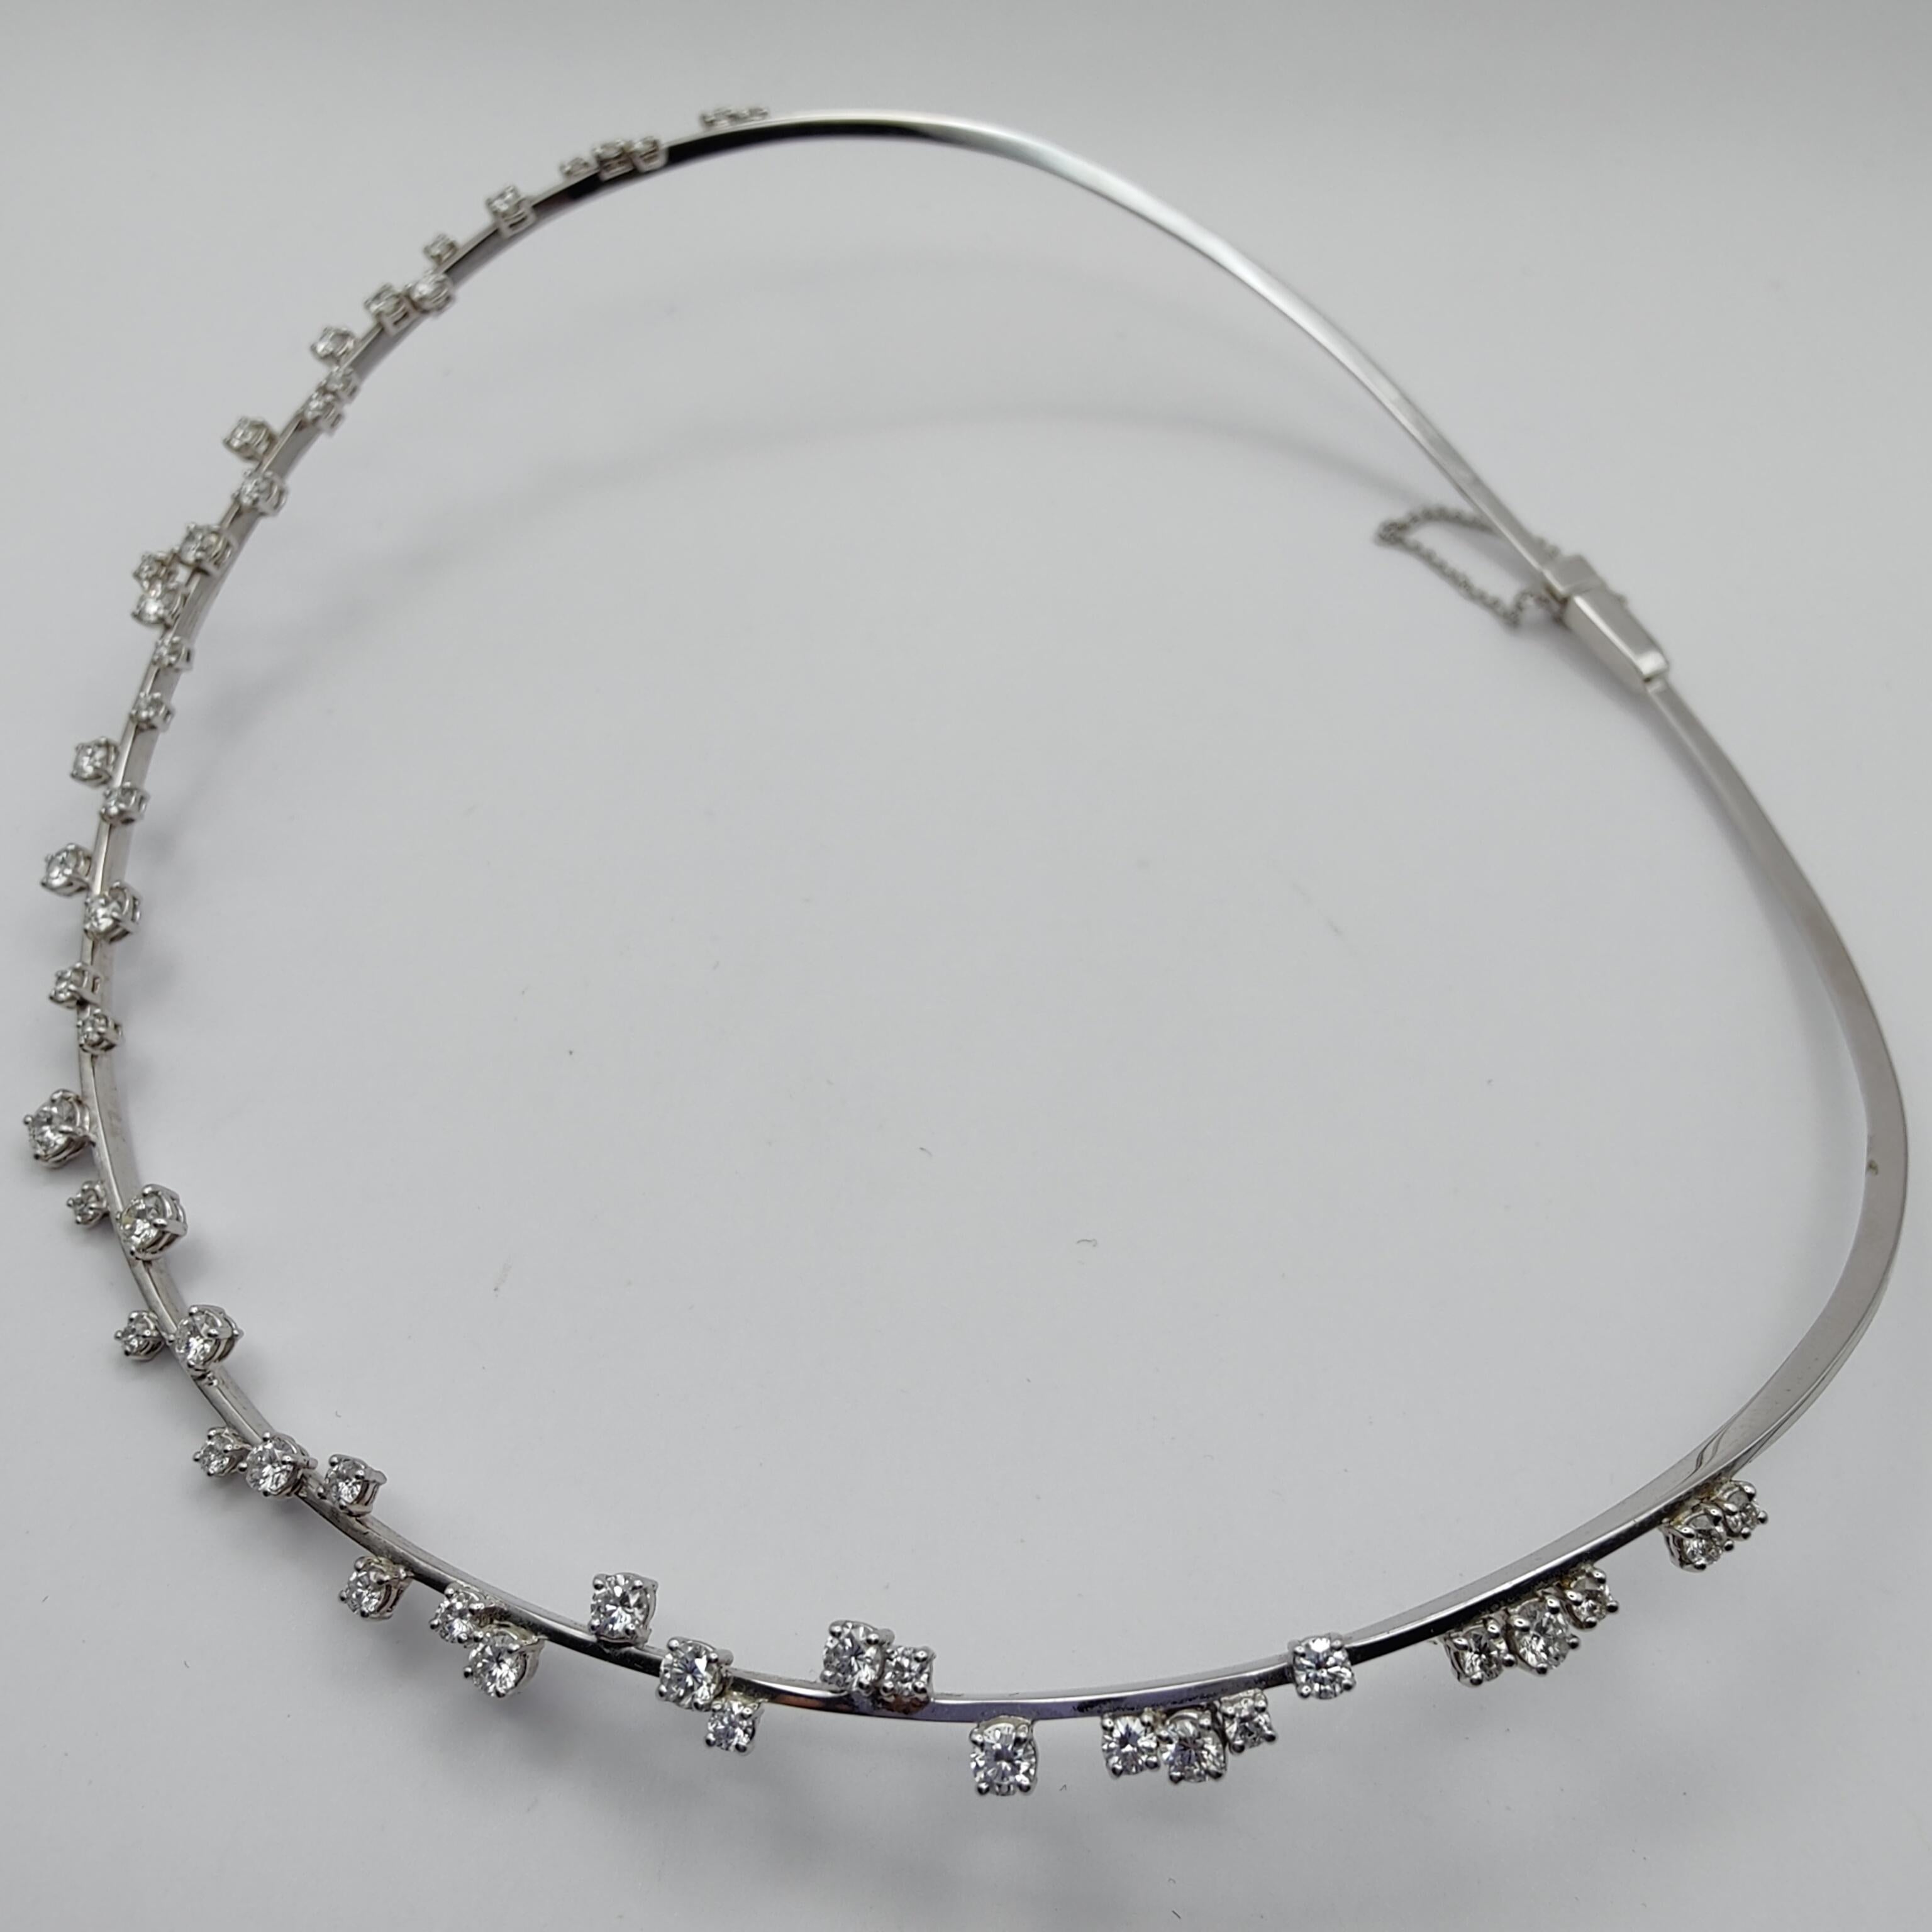 Contemporary 21st Century 3.33 Carat Diamond Choker Necklace in 18K White Gold For Sale